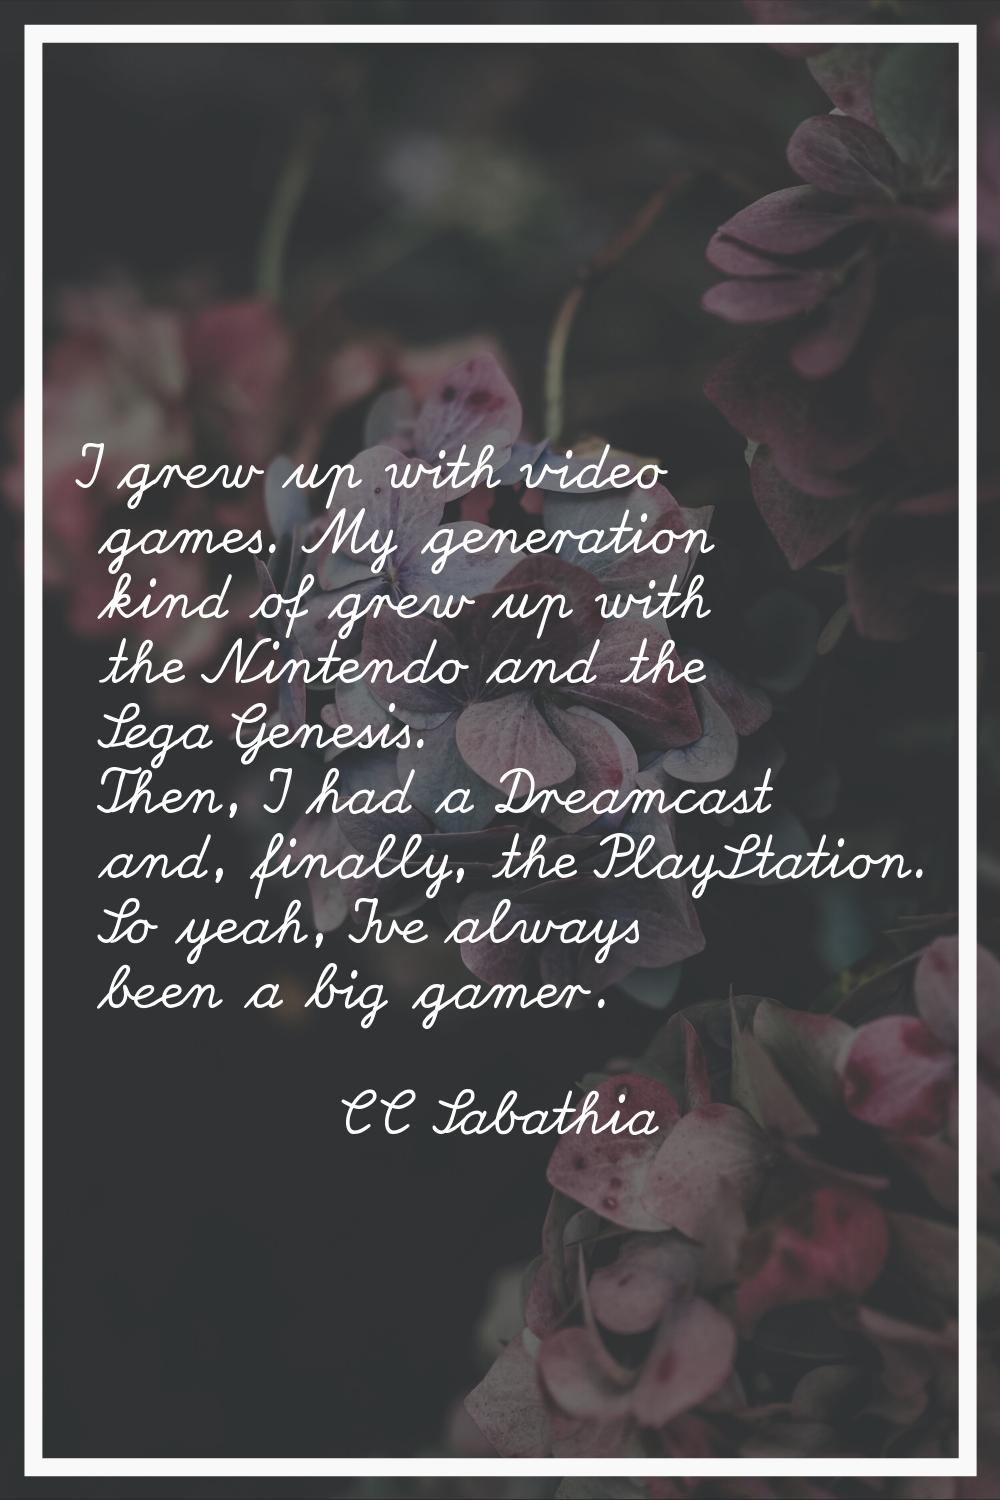 I grew up with video games. My generation kind of grew up with the Nintendo and the Sega Genesis. T